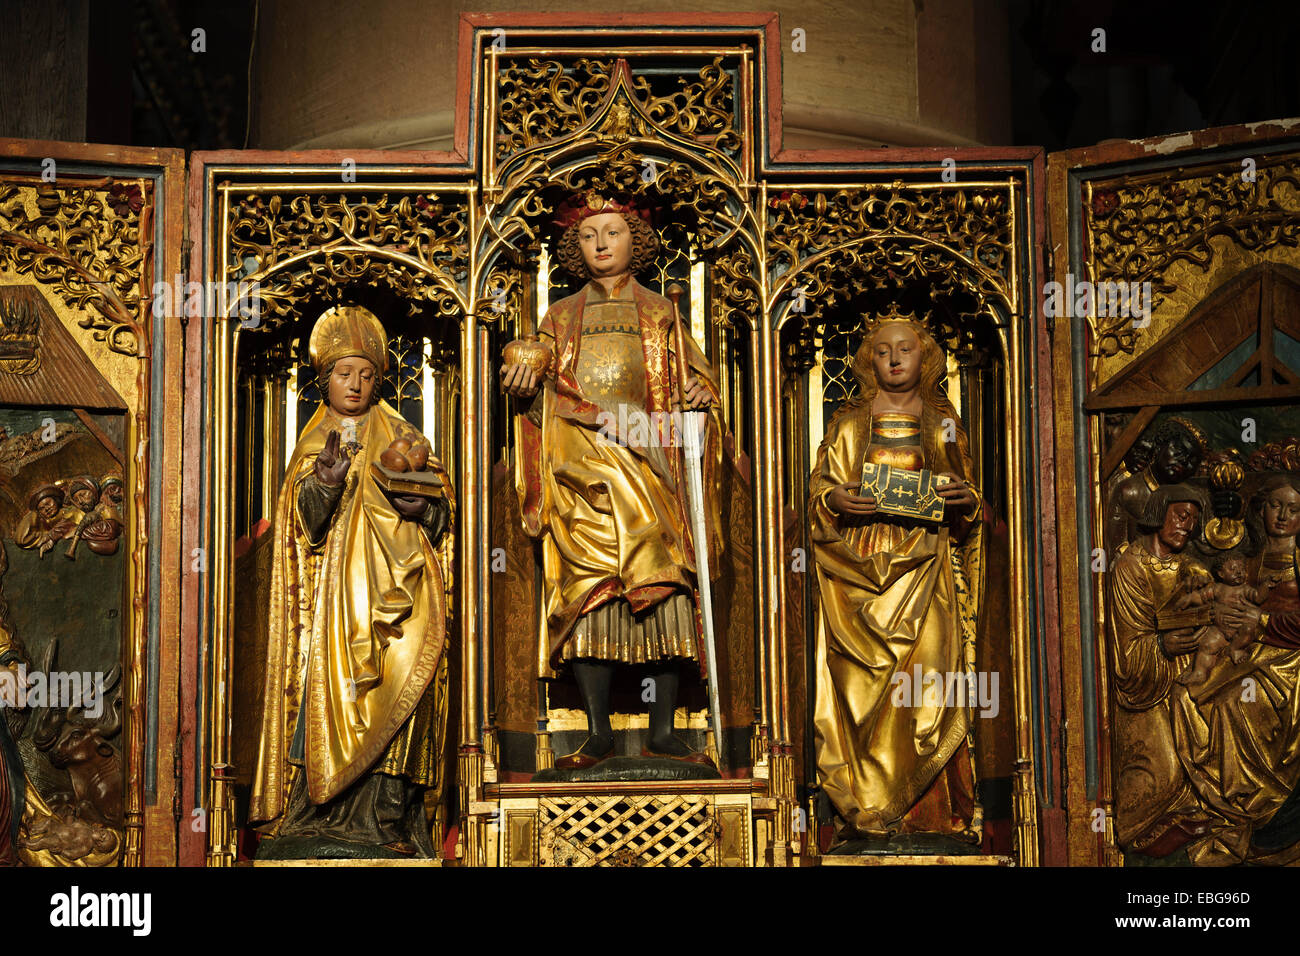 Interior view, side altar of Strasbourg Cathedral with the statues of St Nichola, St Pancrace and Ste. Catherine, Strasbourg Stock Photo